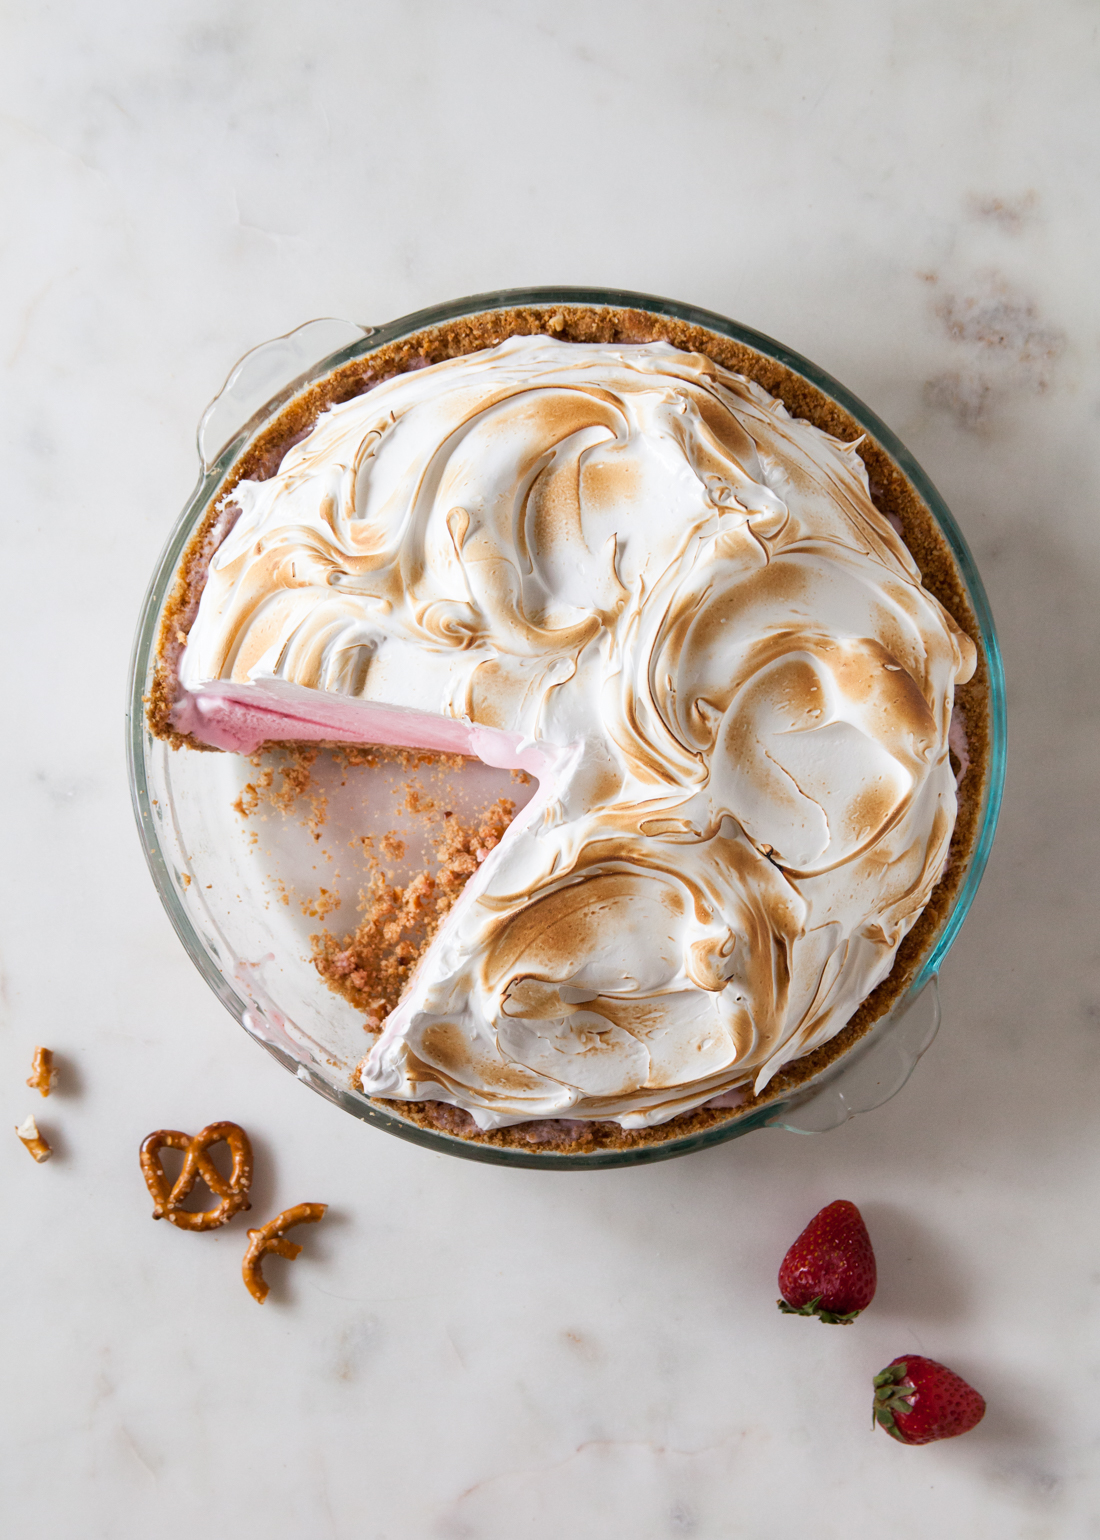 Baked Alaska Ice Cream Pie with a pretzel crusted and toasted meringue topping.